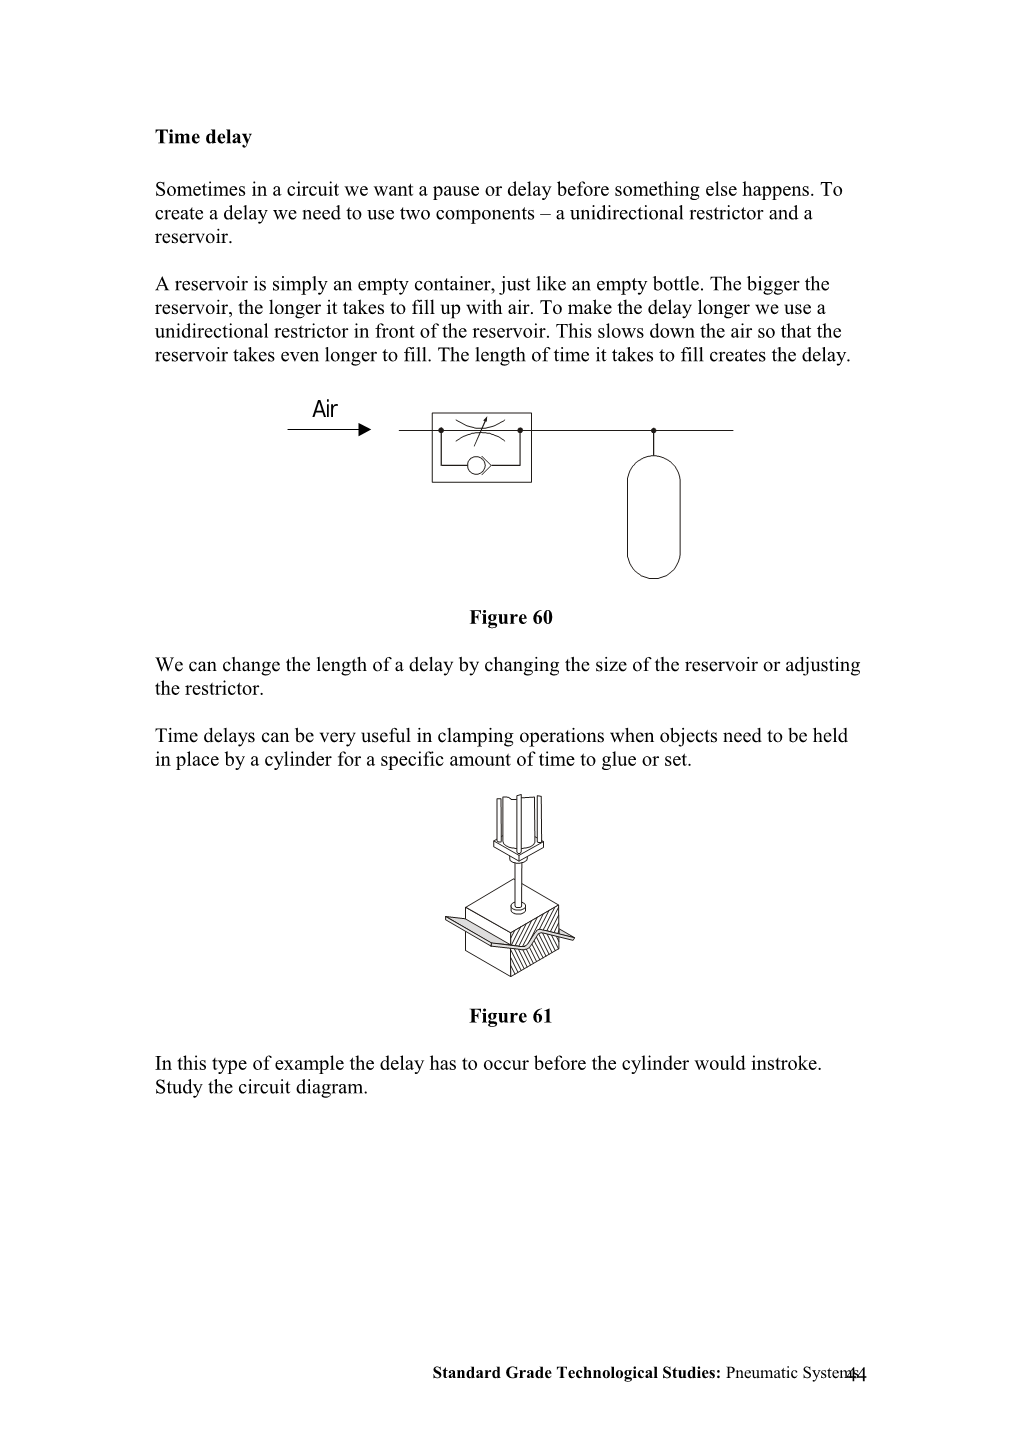 Pneumatic Systems (Part 3)